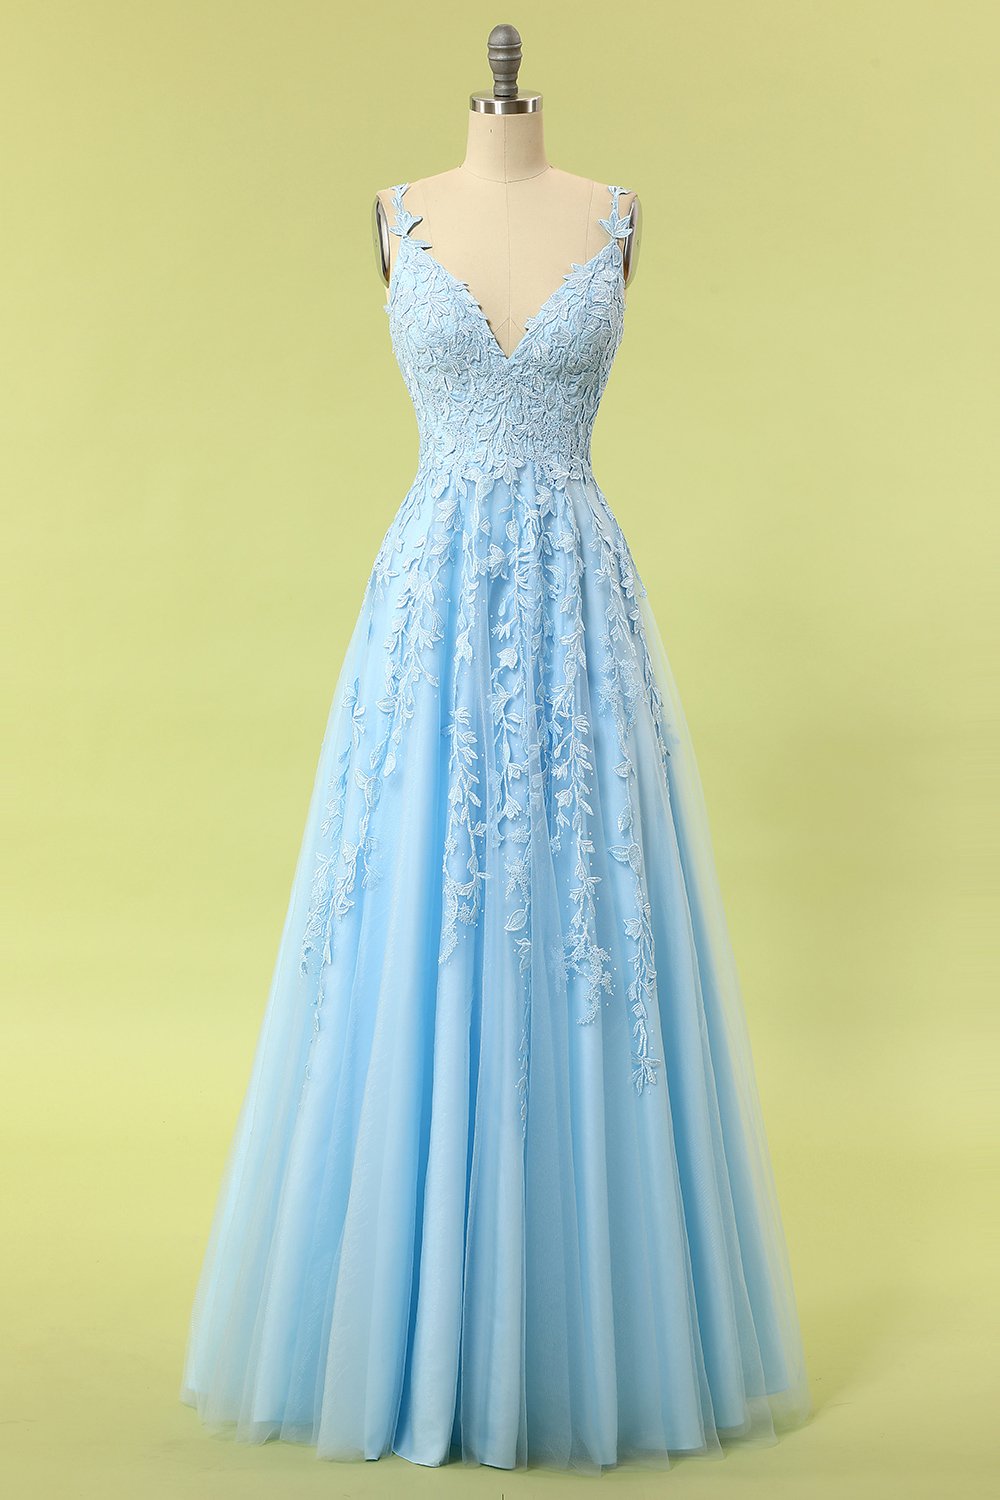 Zapaka Purple Tulle Ball Dress with Lace Sky Blue Long Evening Prom ...